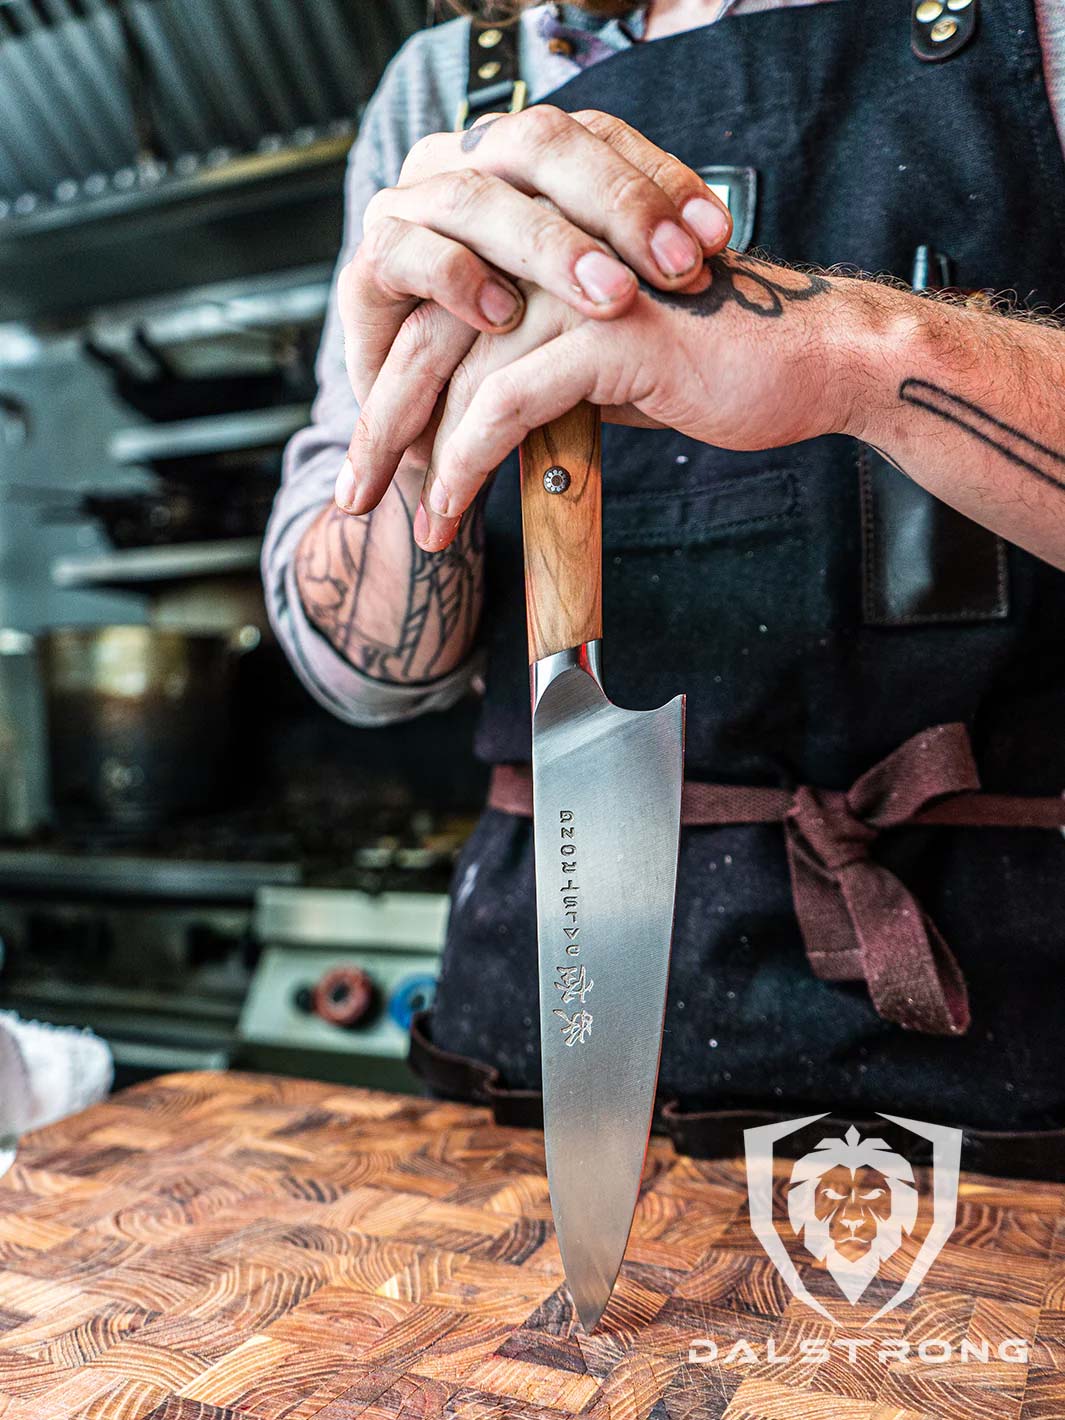 A man with tattoo is holding the Dalstrong phantom series 8 inch chef knife with olive wood handle.